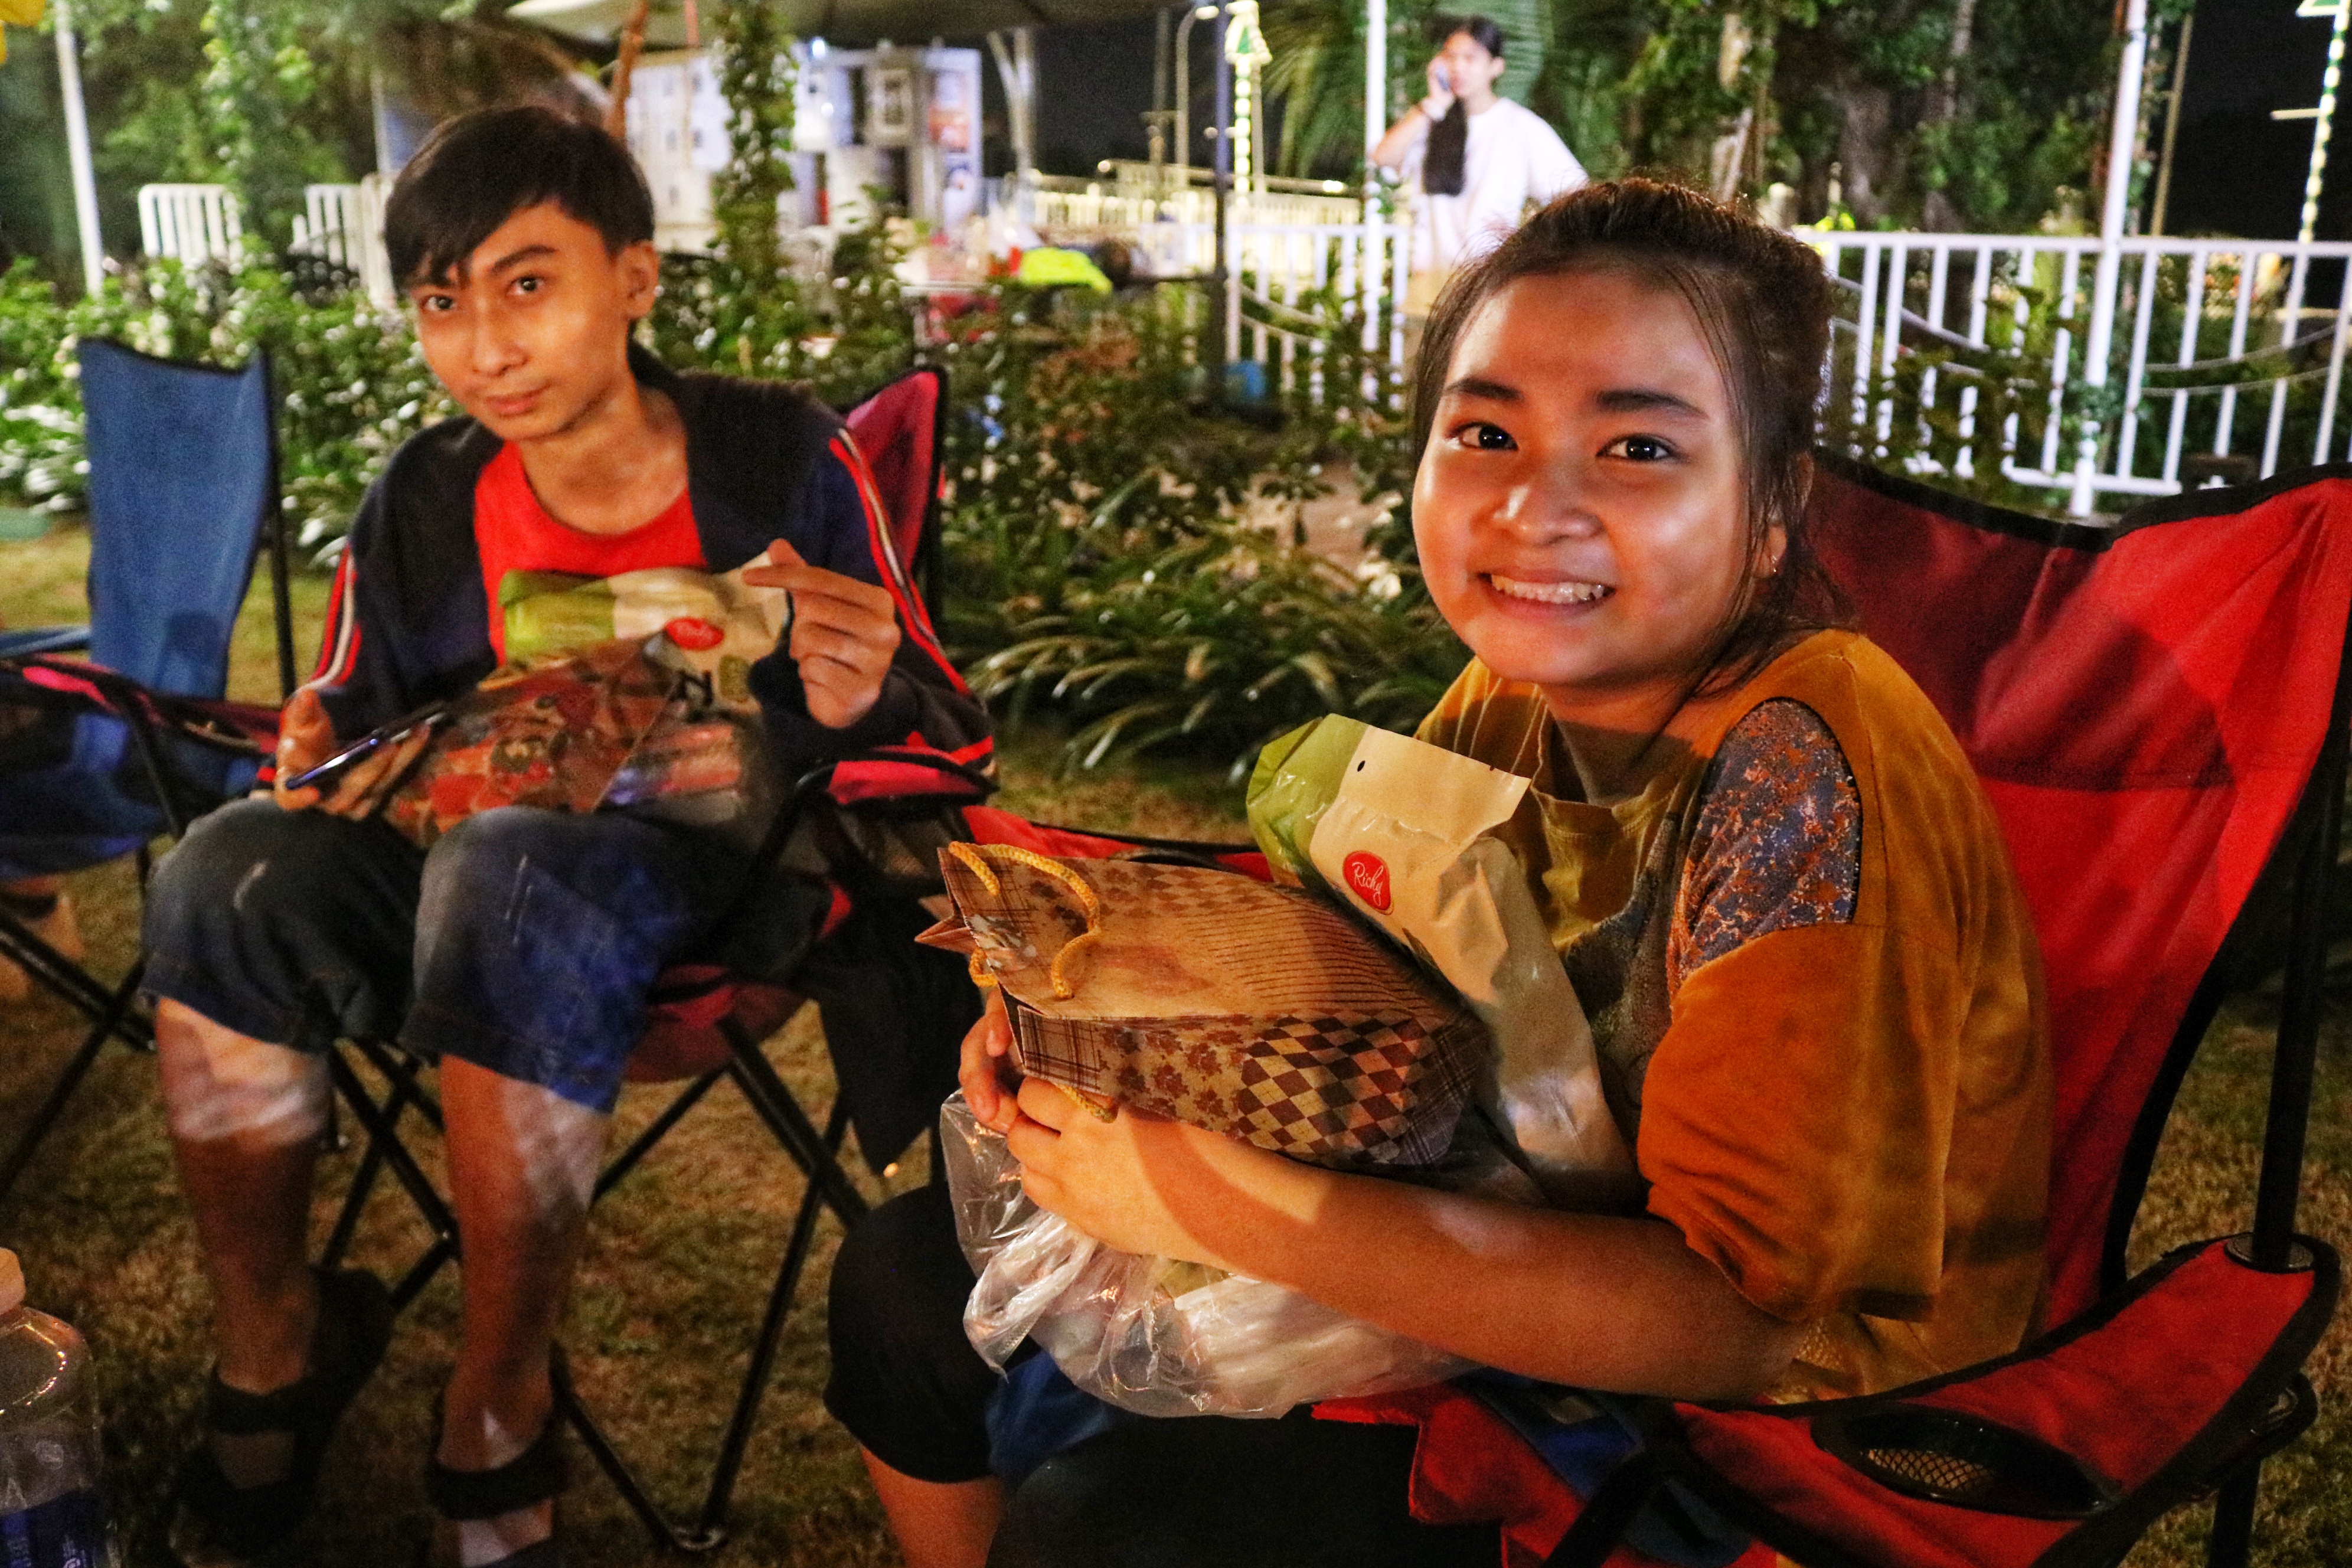 Ngoc An (right) and her brother Huu An receive Christmas gifts at the event. Photo: Hoang An / Tuoi Tre News